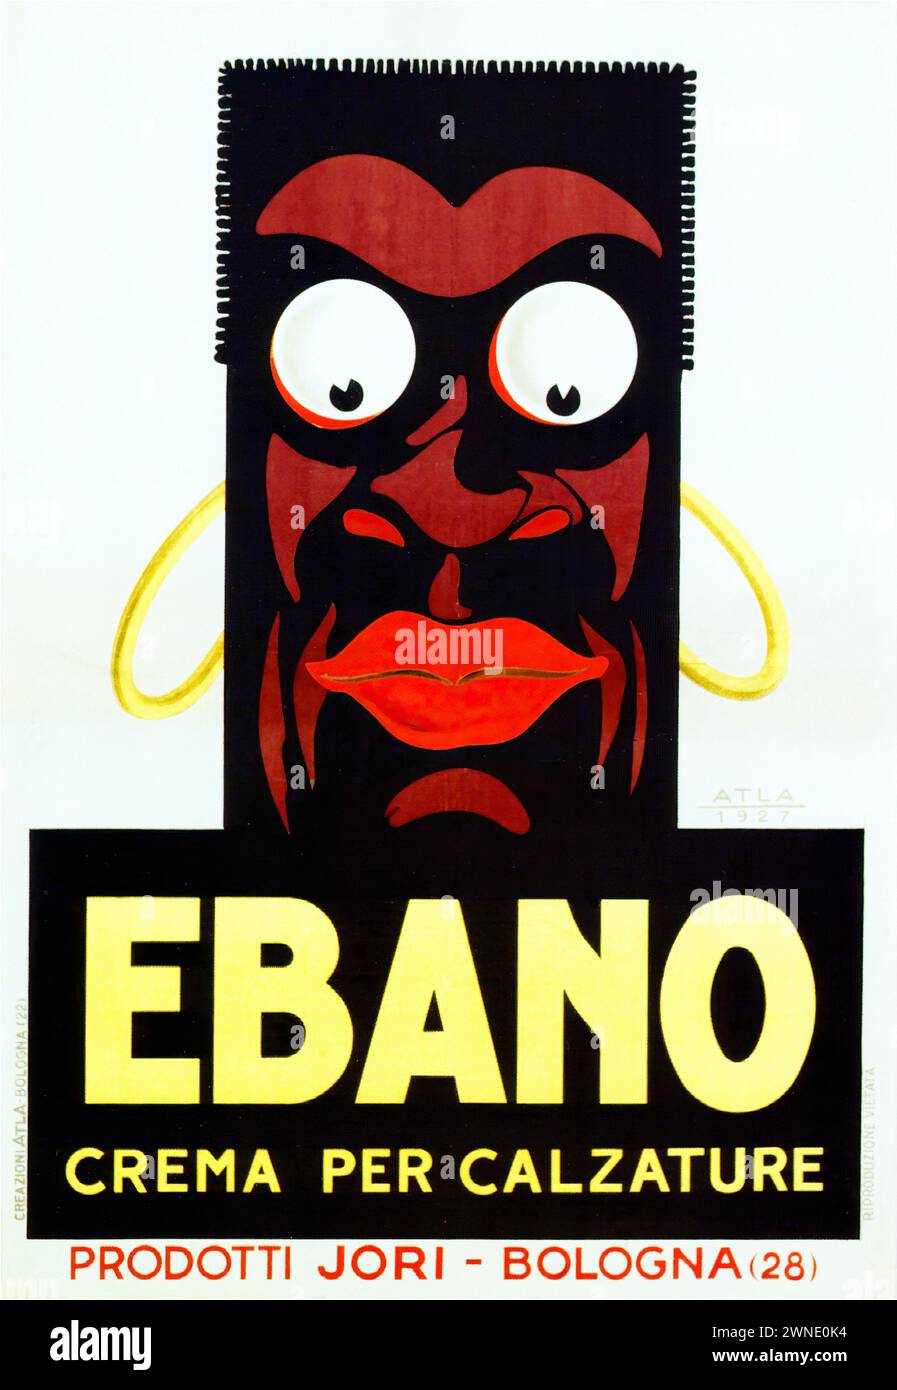 'EBANO CREMA PER CALZATURE PRODOTTI JORI - BOLOGNA (28)' ['EBANO SHOE CREAM PRODUCTS JORI - BOLOGNA (28)'] Vintage Italian Advertising showing a stylized anthropomorphic black shoe polish container with facial features, against a white background. The design reflects the playful and experimental style of the late 1920s graphic design. Stock Photo